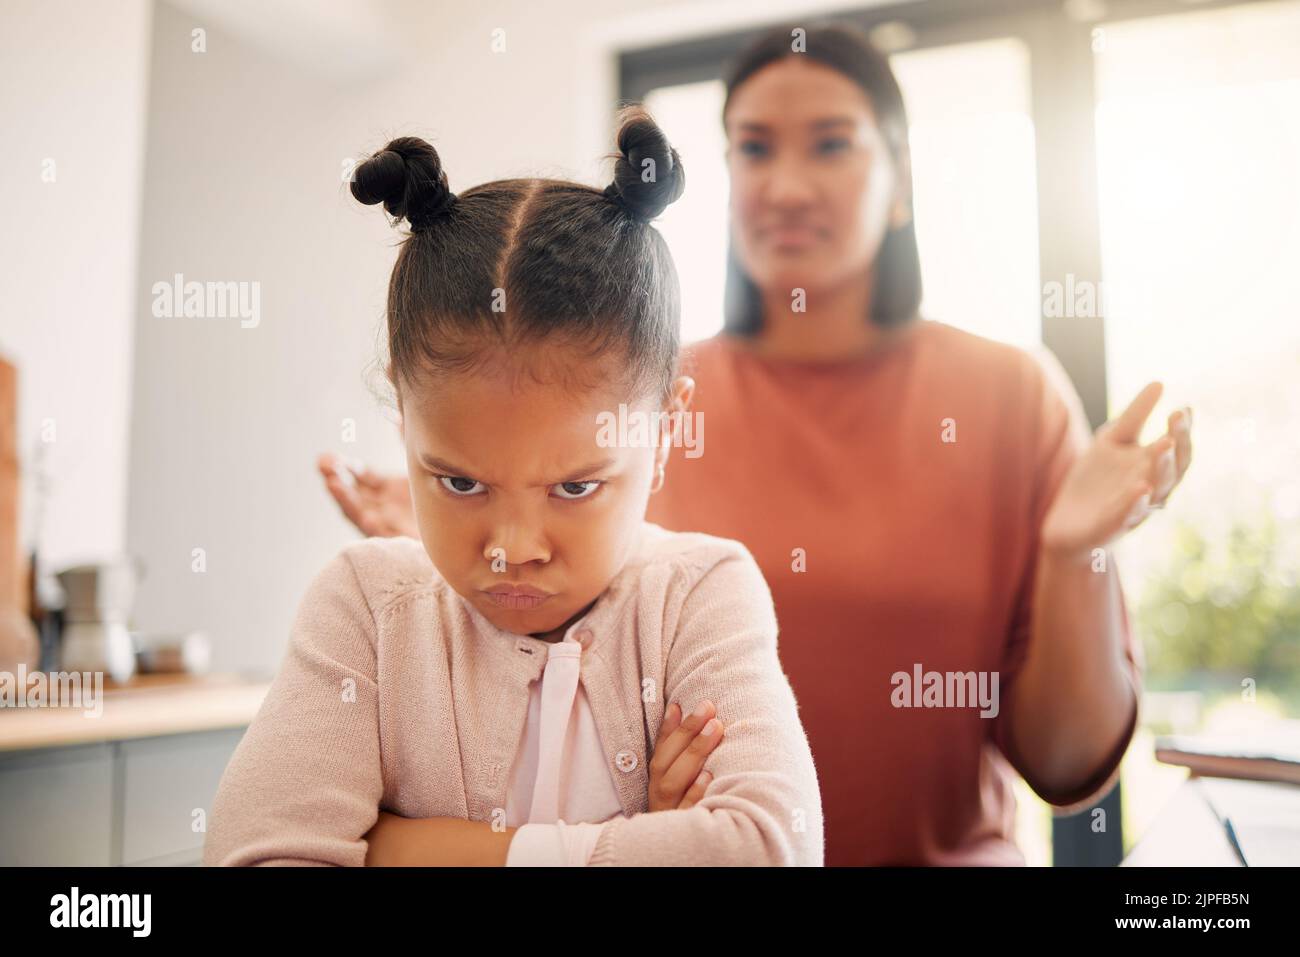 Angry little girl, unhappy and upset after fight or being scolded by mother, frowning with attitude and arms crossed. Naughty child looking offended Stock Photo